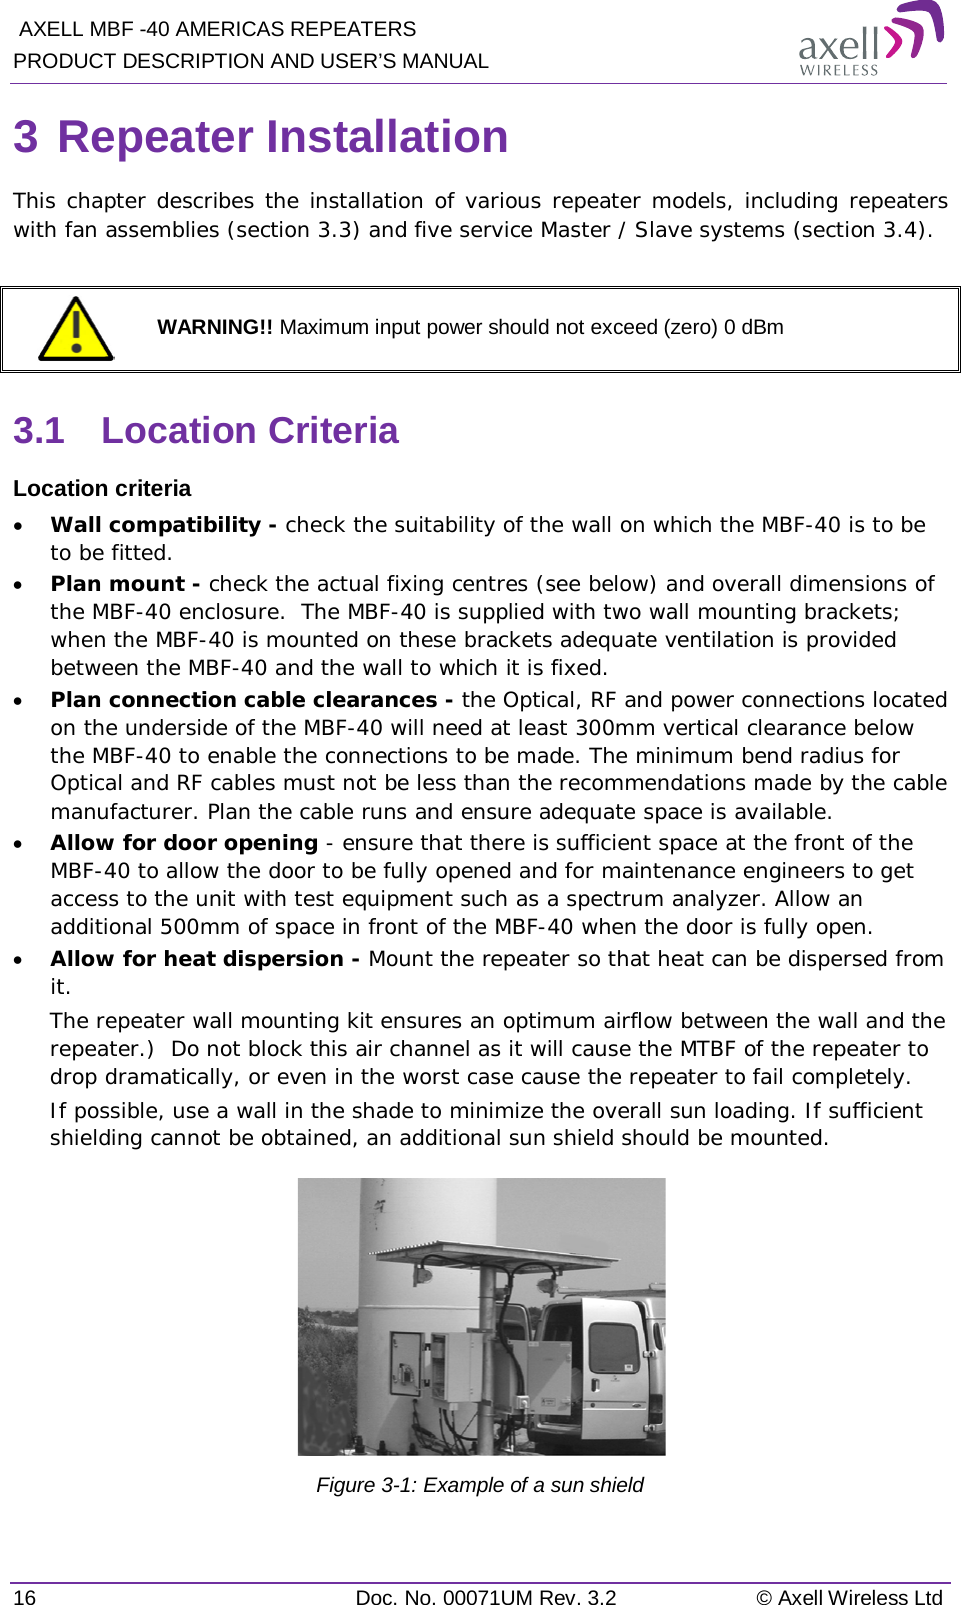  AXELL MBF -40 AMERICAS REPEATERS PRODUCT DESCRIPTION AND USER’S MANUAL 16 Doc. No. 00071UM Rev. 3.2 © Axell Wireless Ltd 3 Repeater Installation This chapter describes the installation of various repeater models, including repeaters with fan assemblies (section  3.3) and five service Master / Slave systems (section  3.4).   WARNING!! Maximum input power should not exceed (zero) 0 dBm 3.1  Location Criteria Location criteria • Wall compatibility - check the suitability of the wall on which the MBF-40 is to be to be fitted.  • Plan mount - check the actual fixing centres (see below) and overall dimensions of the MBF-40 enclosure.  The MBF-40 is supplied with two wall mounting brackets; when the MBF-40 is mounted on these brackets adequate ventilation is provided between the MBF-40 and the wall to which it is fixed. • Plan connection cable clearances - the Optical, RF and power connections located on the underside of the MBF-40 will need at least 300mm vertical clearance below the MBF-40 to enable the connections to be made. The minimum bend radius for Optical and RF cables must not be less than the recommendations made by the cable manufacturer. Plan the cable runs and ensure adequate space is available. • Allow for door opening - ensure that there is sufficient space at the front of the MBF-40 to allow the door to be fully opened and for maintenance engineers to get access to the unit with test equipment such as a spectrum analyzer. Allow an additional 500mm of space in front of the MBF-40 when the door is fully open. • Allow for heat dispersion - Mount the repeater so that heat can be dispersed from it.   The repeater wall mounting kit ensures an optimum airflow between the wall and the repeater.)  Do not block this air channel as it will cause the MTBF of the repeater to drop dramatically, or even in the worst case cause the repeater to fail completely.  If possible, use a wall in the shade to minimize the overall sun loading. If sufficient shielding cannot be obtained, an additional sun shield should be mounted.   Figure  3-1: Example of a sun shield  